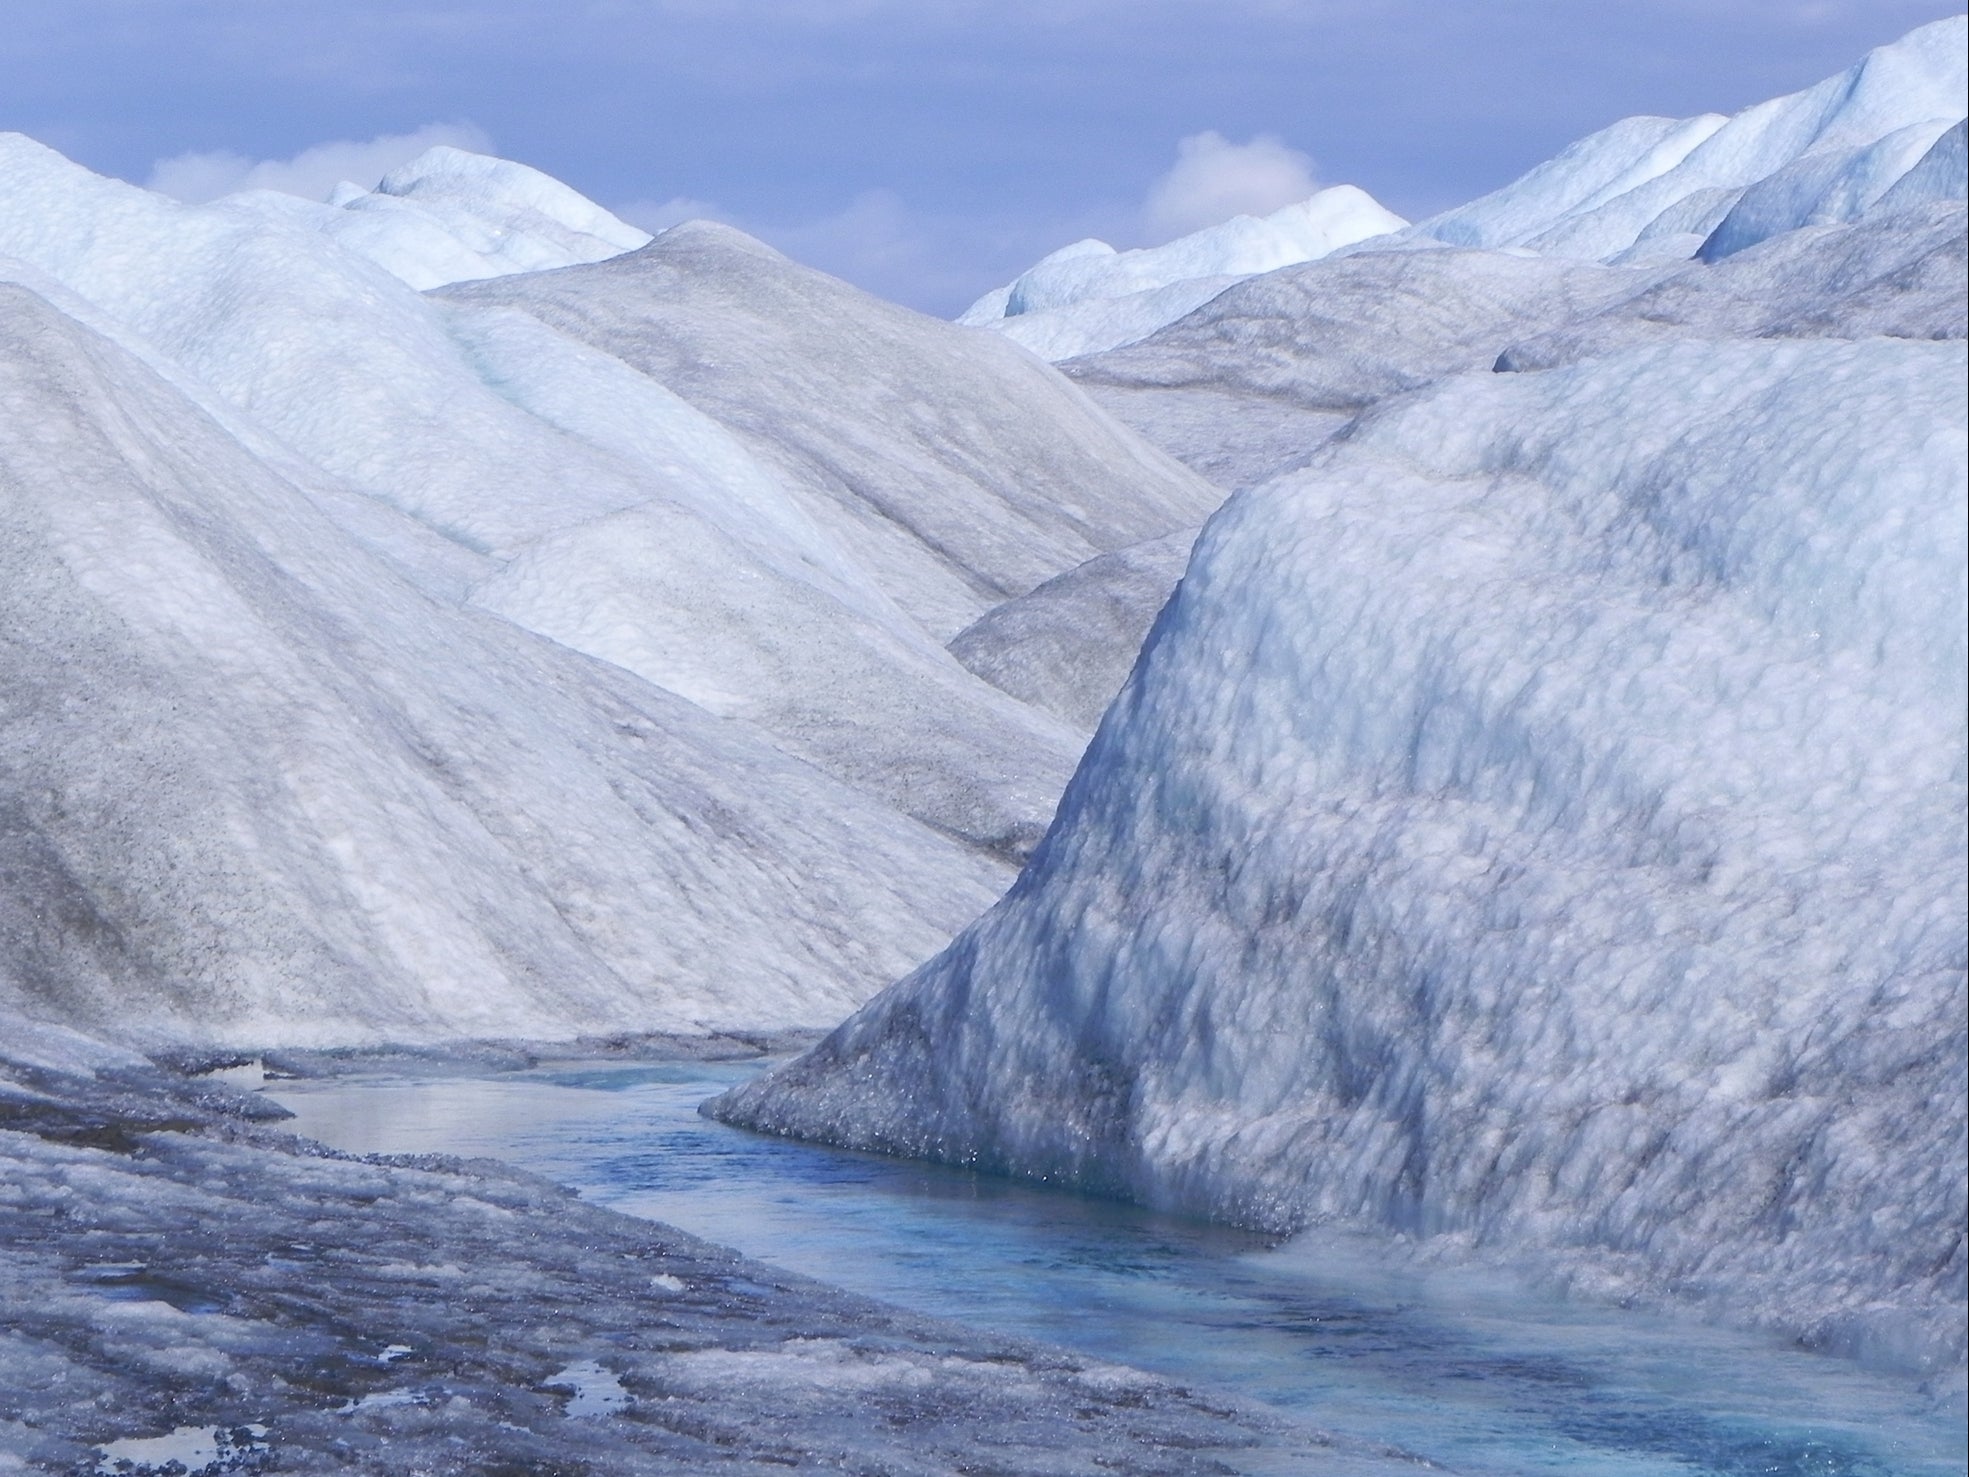 The preserved remains of ancient plants lie under here. Greenland’s icesheet is up to 1.9 miles thick and holds vast quantities of water, which if released, would swamp coastal cities around the world